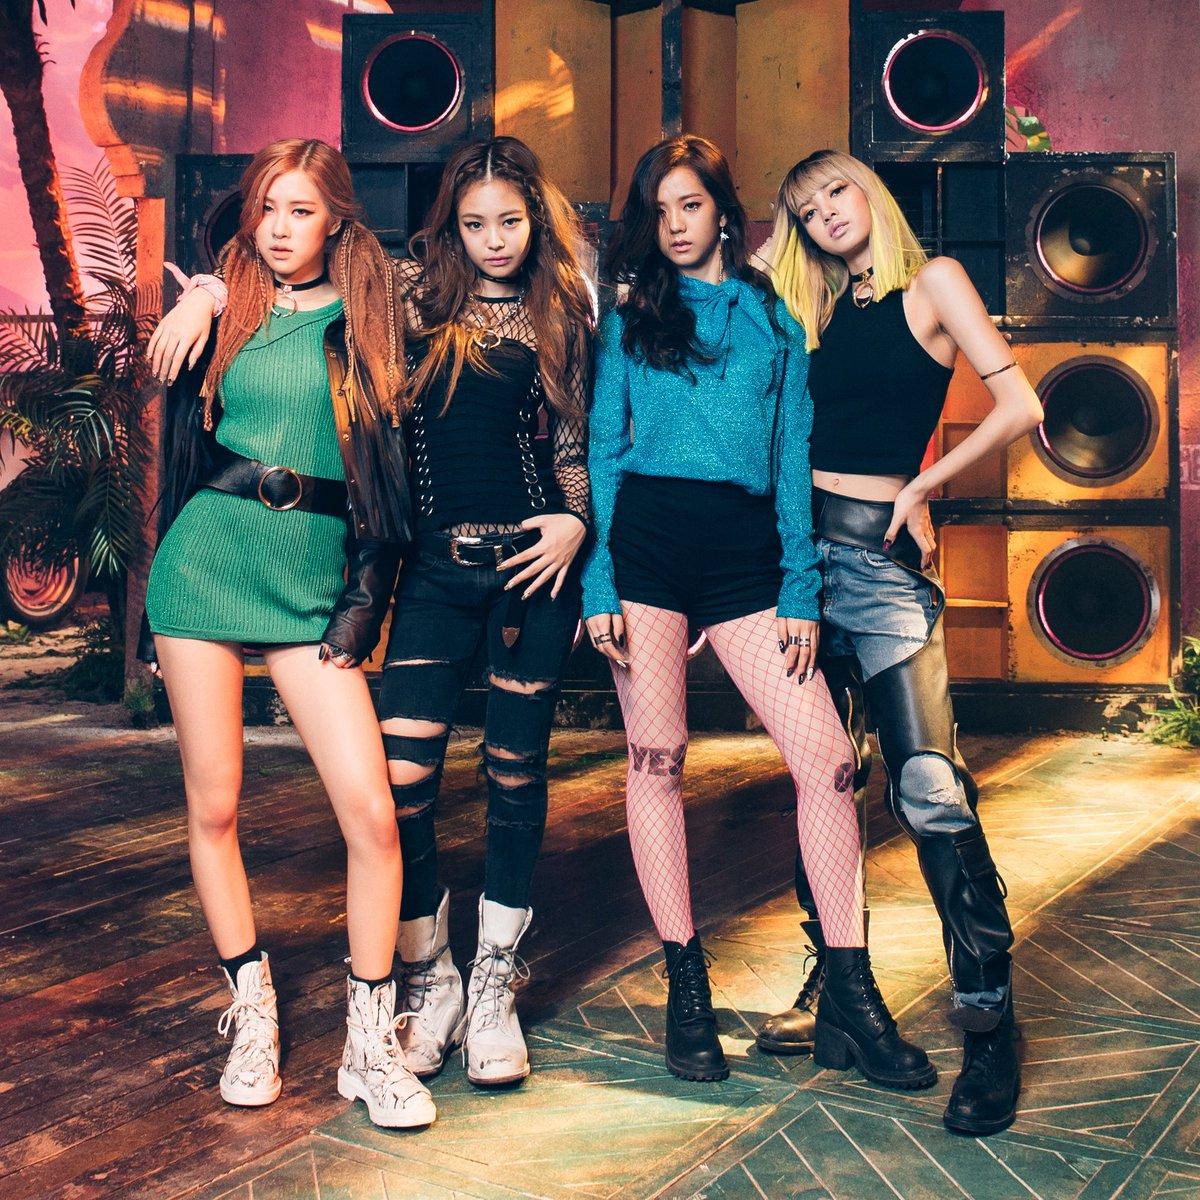 Rough Translation: An In Depth Look At Black Pink's “Boombayah”